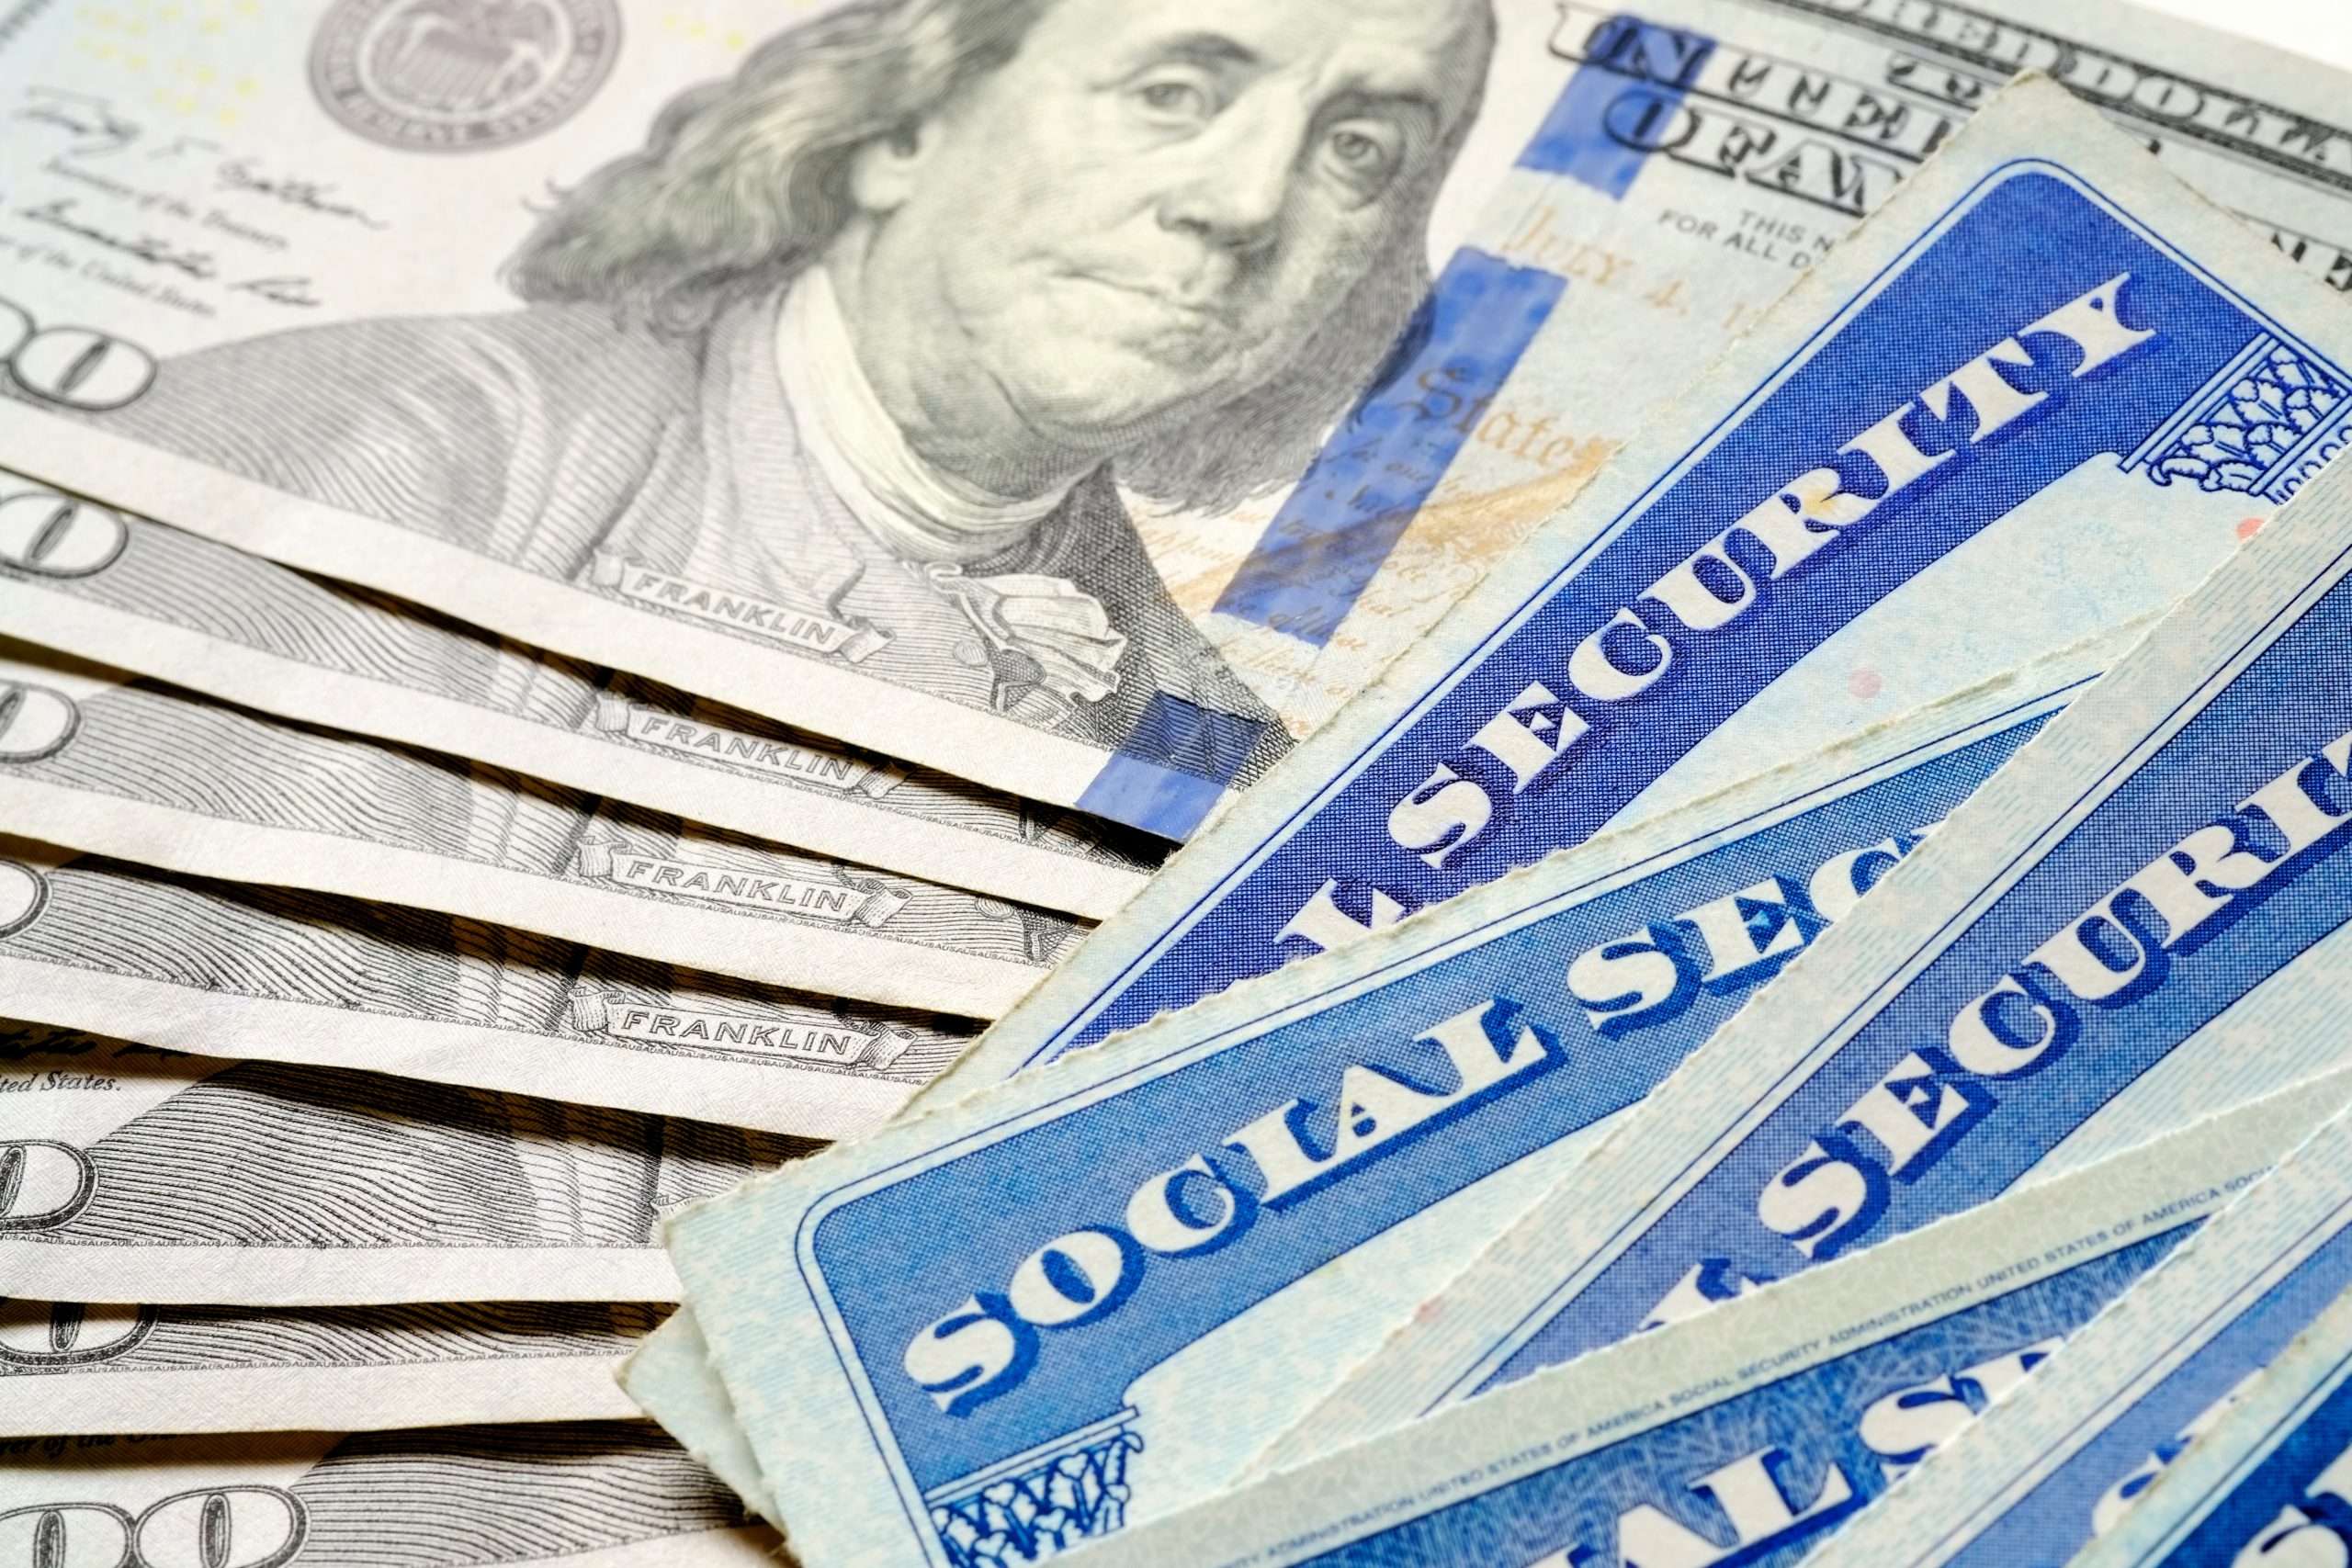 Social Security Benefits Estimator. Social Security Cards Representing Finances and Retirement